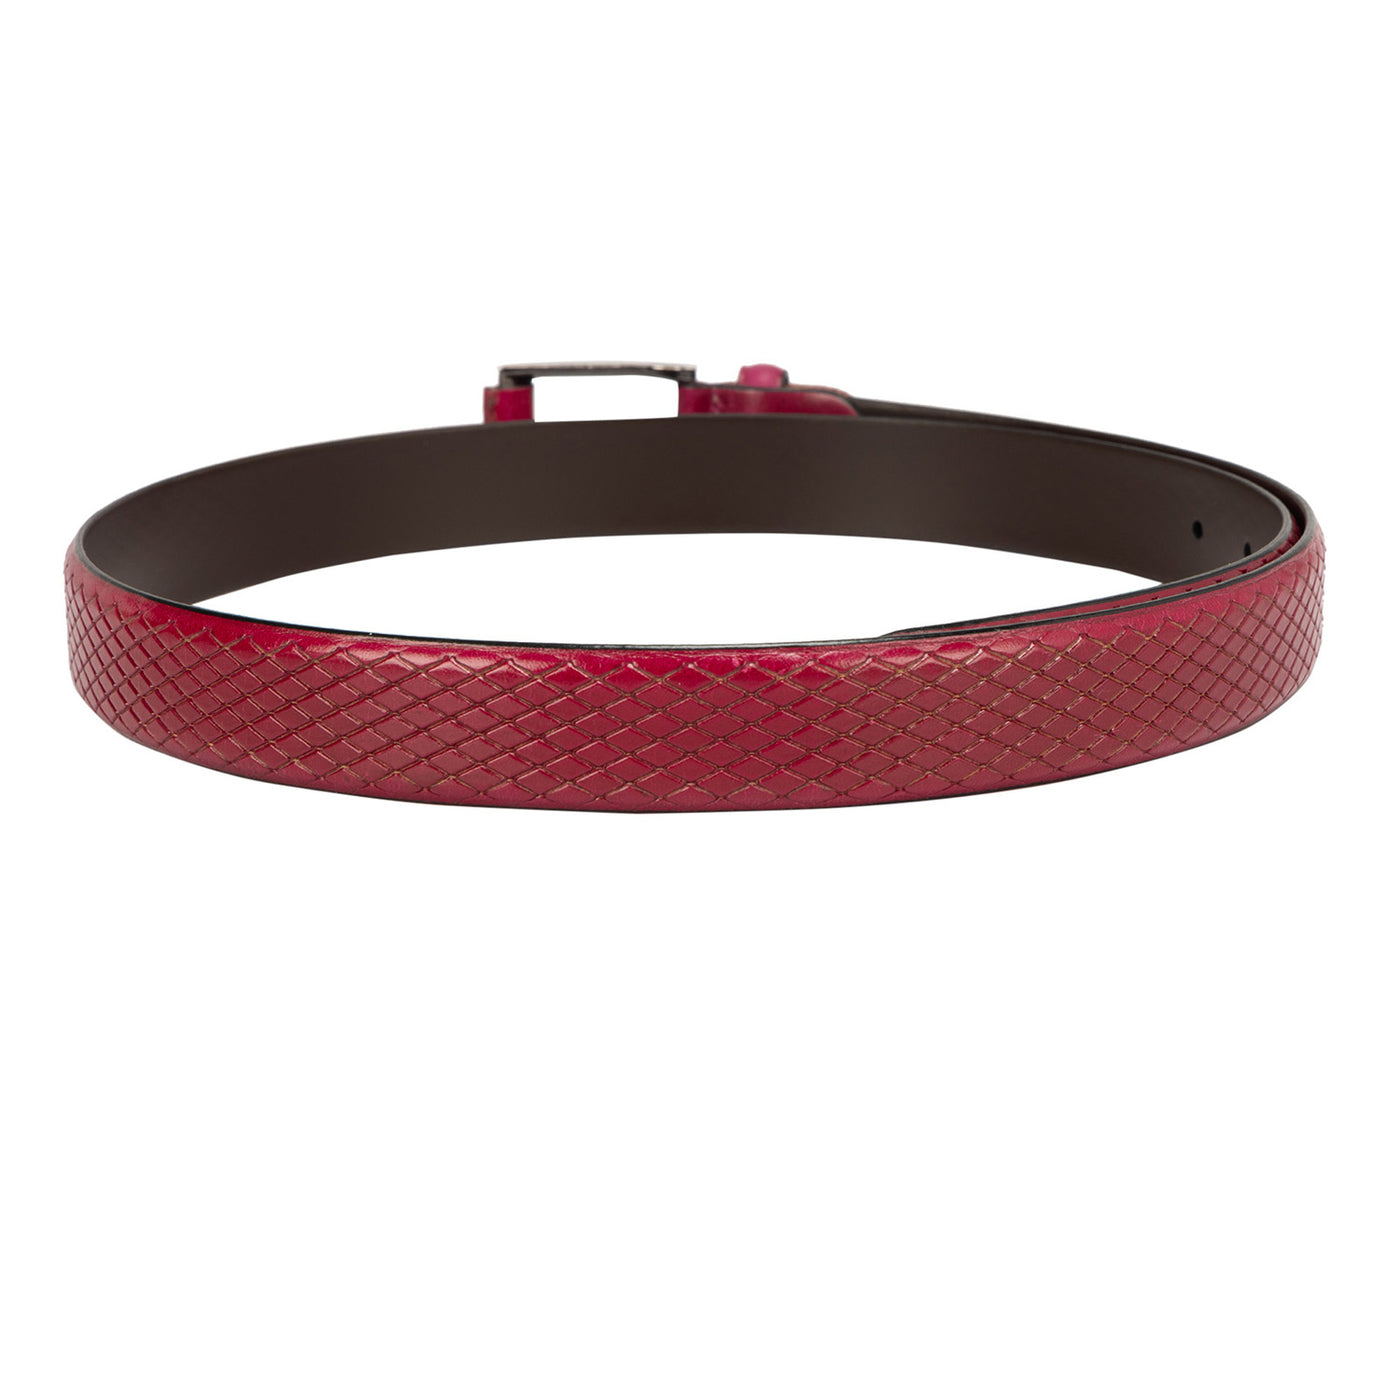 Casual Mat Emboss Leather Ladies Belt - Pink